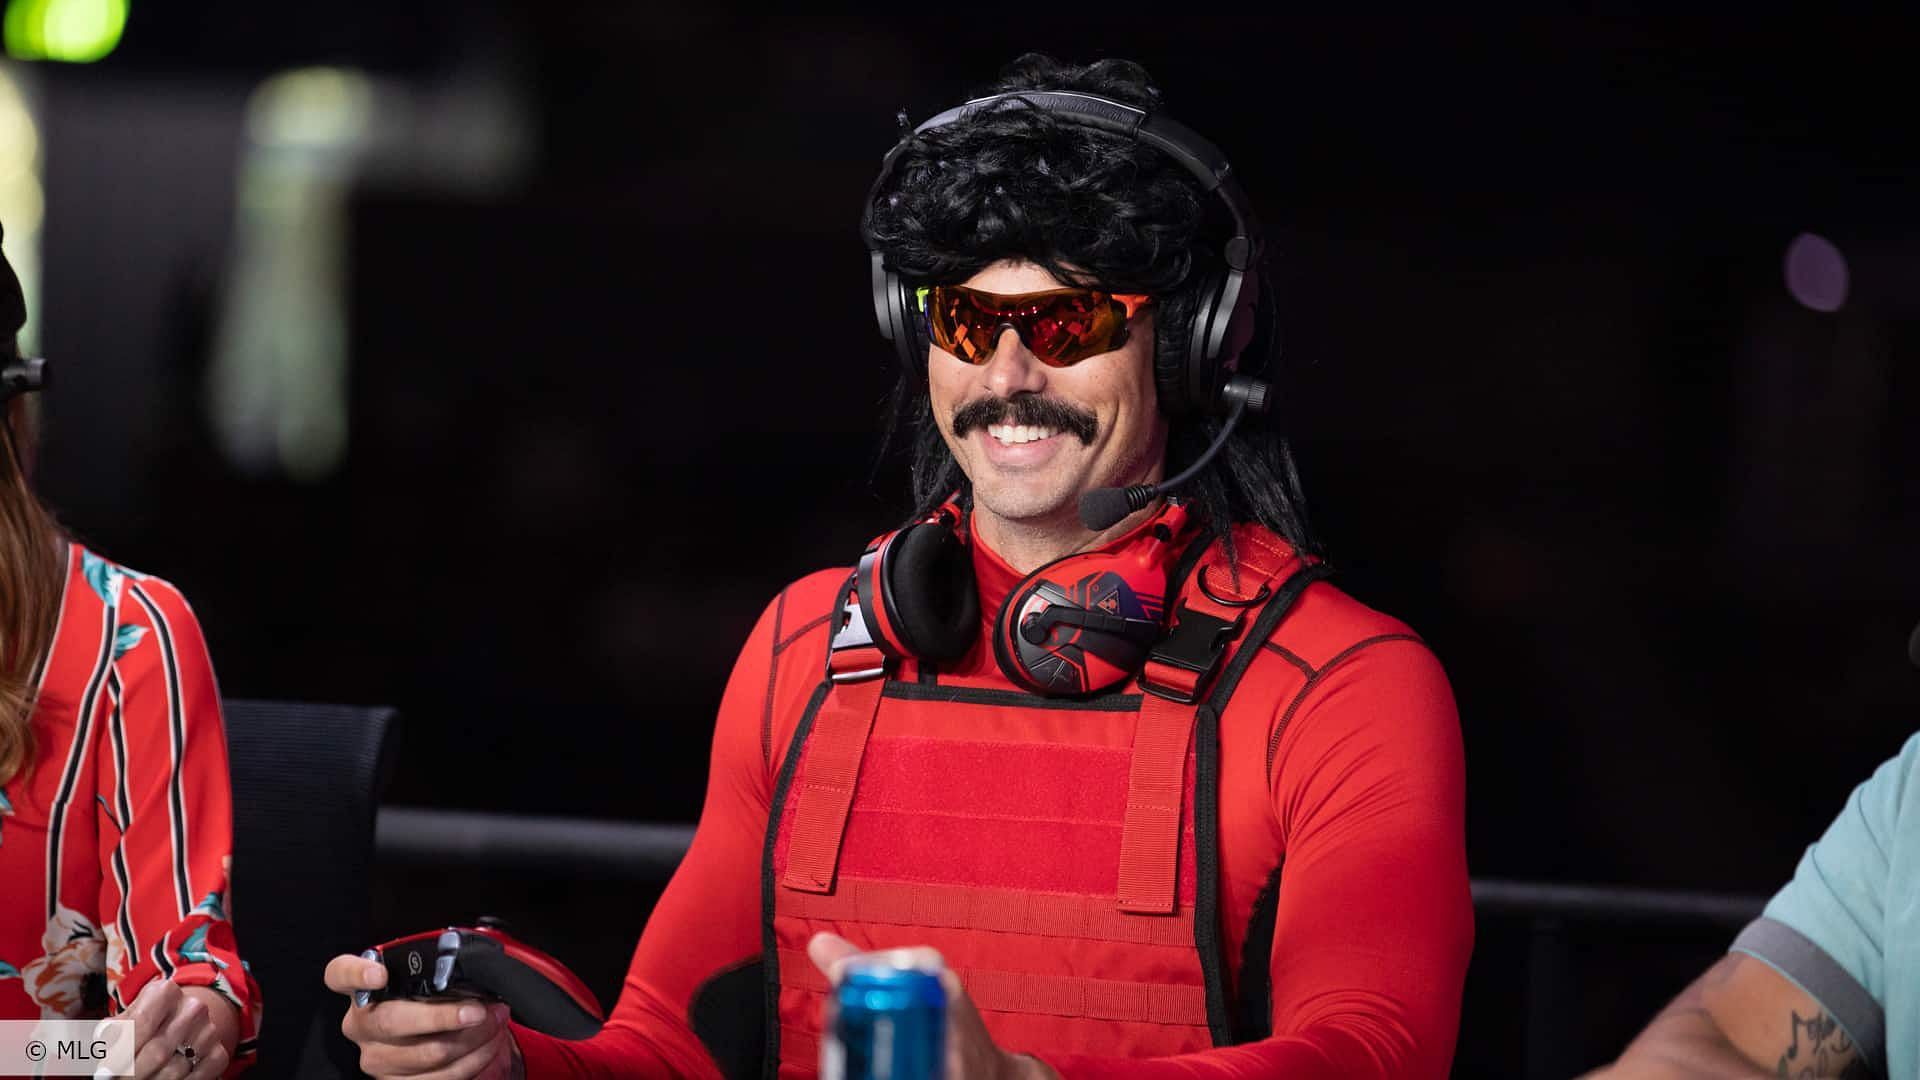 Dr DisRespect says gay, lesbian and trans people are welcome on his stream (Image via Sportskeeda)